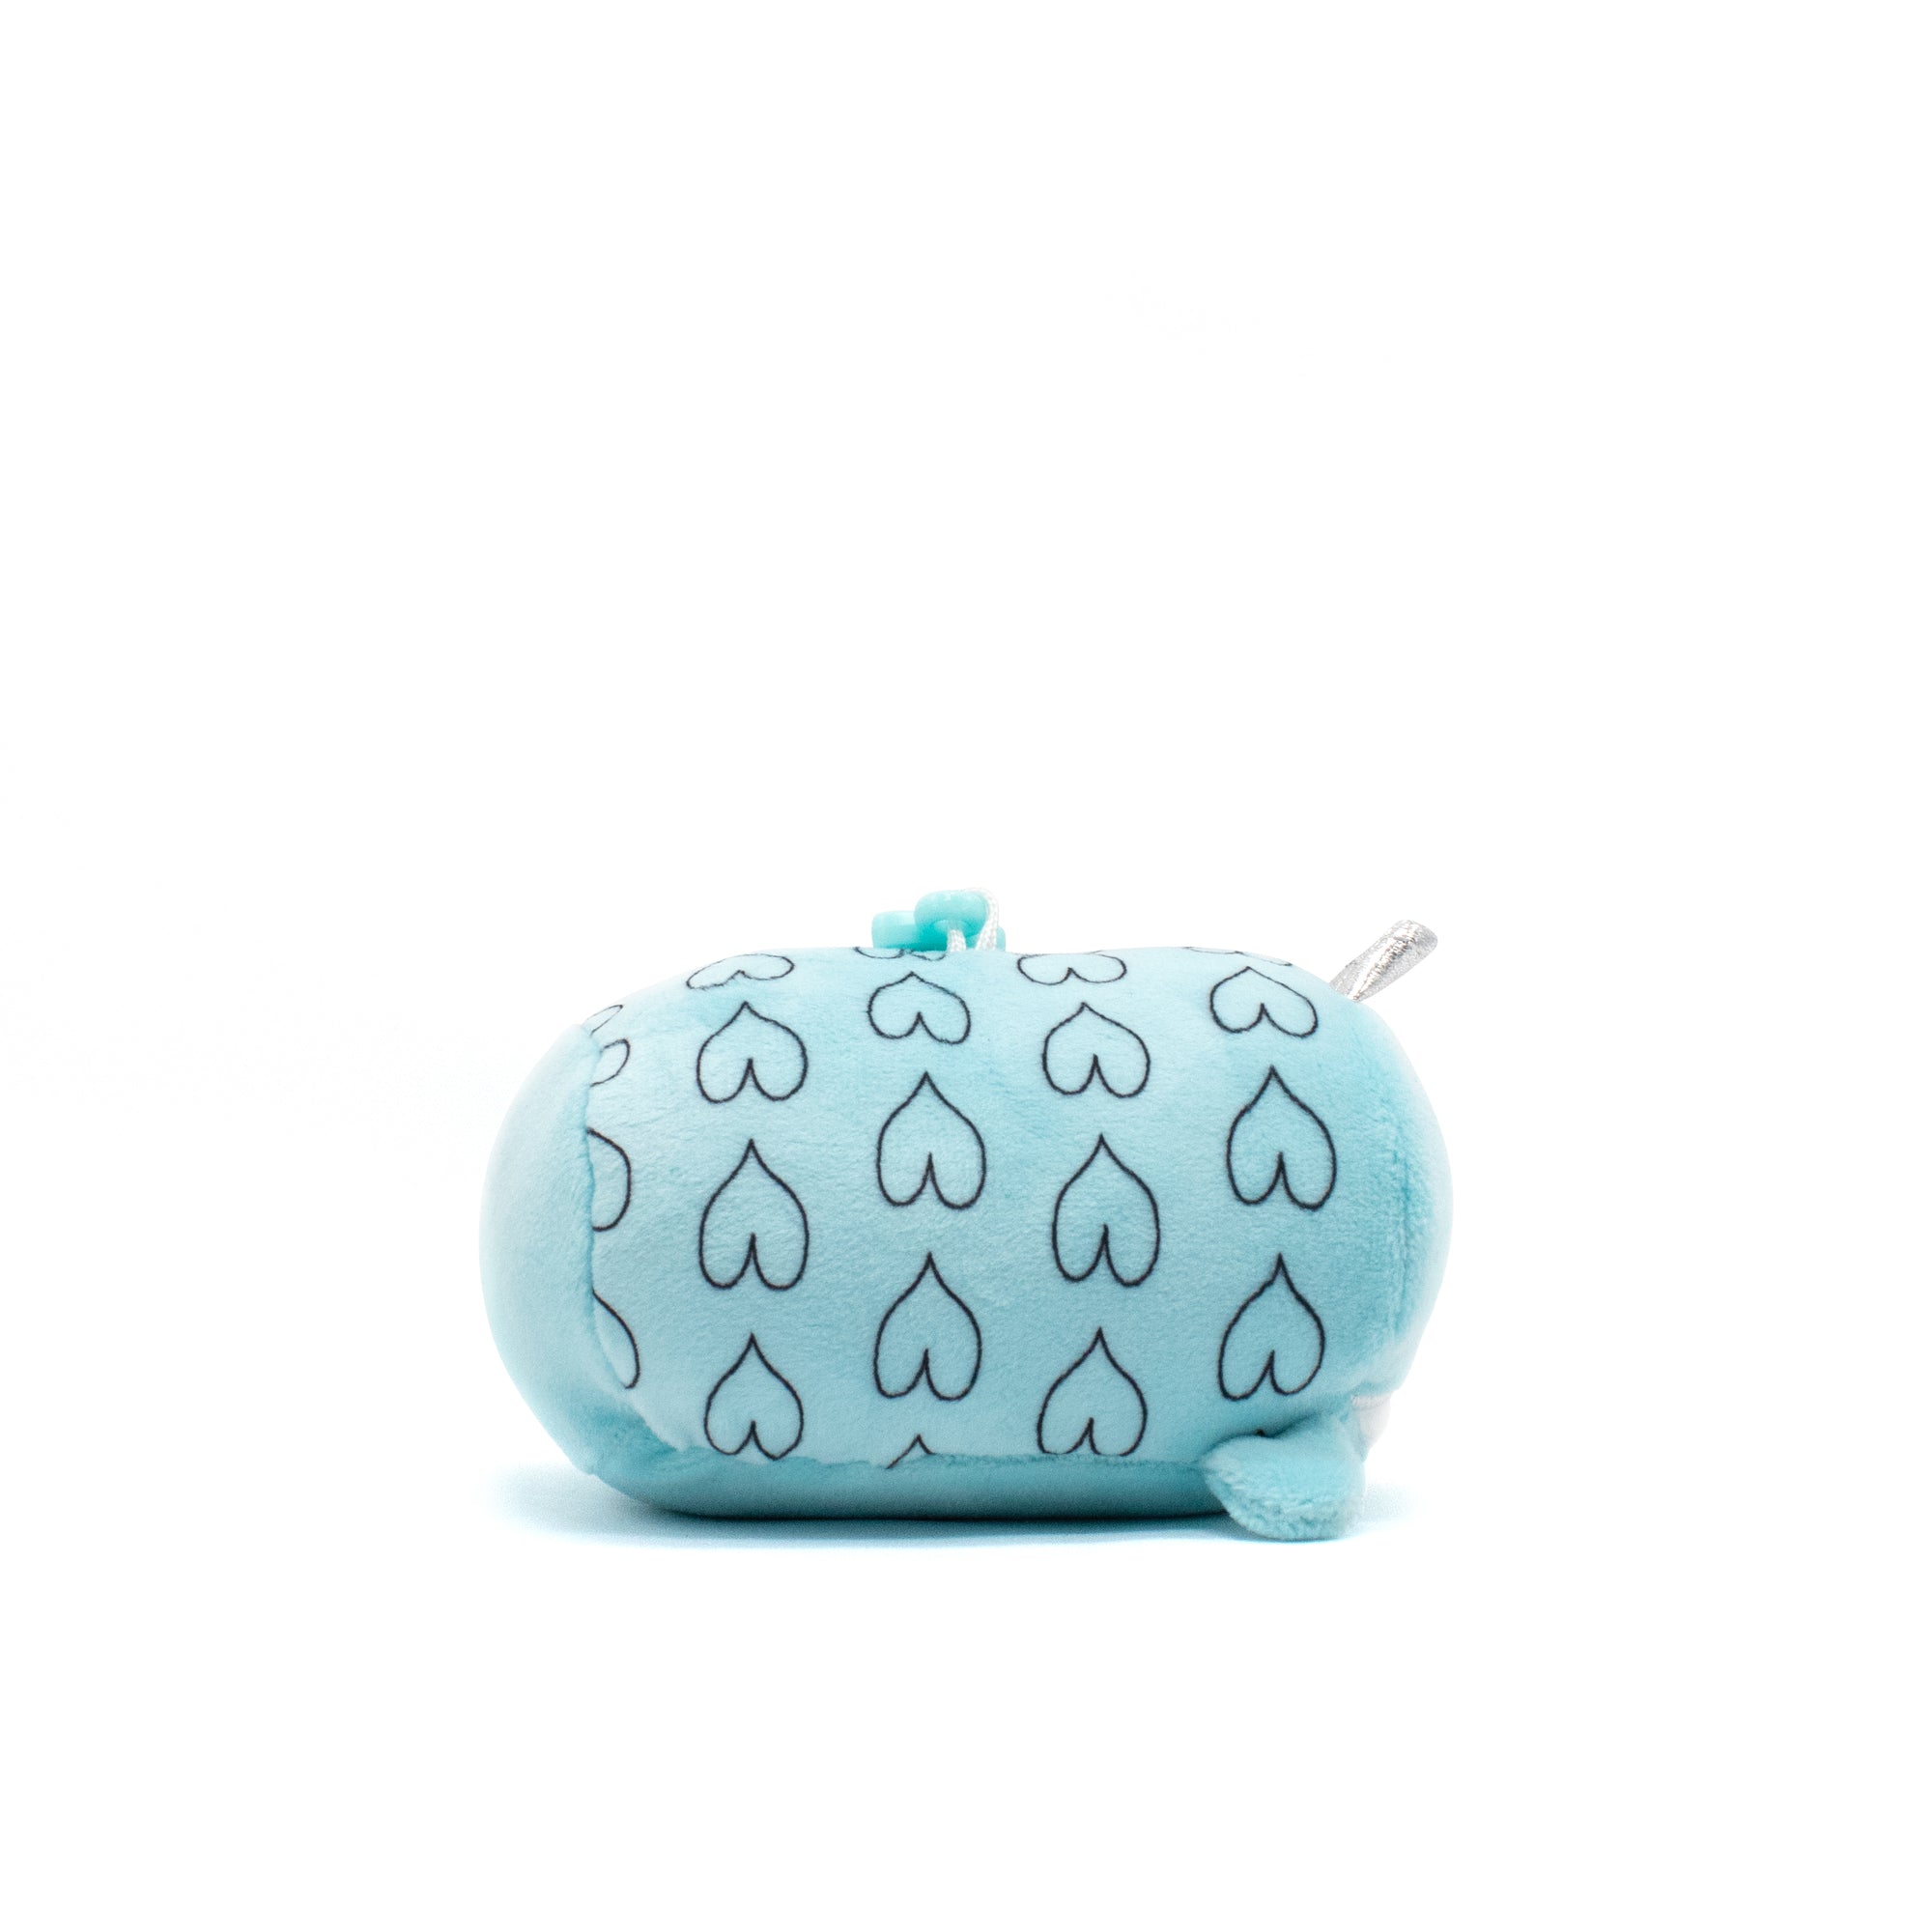 Hershel the Narwhal Plush Clip-On